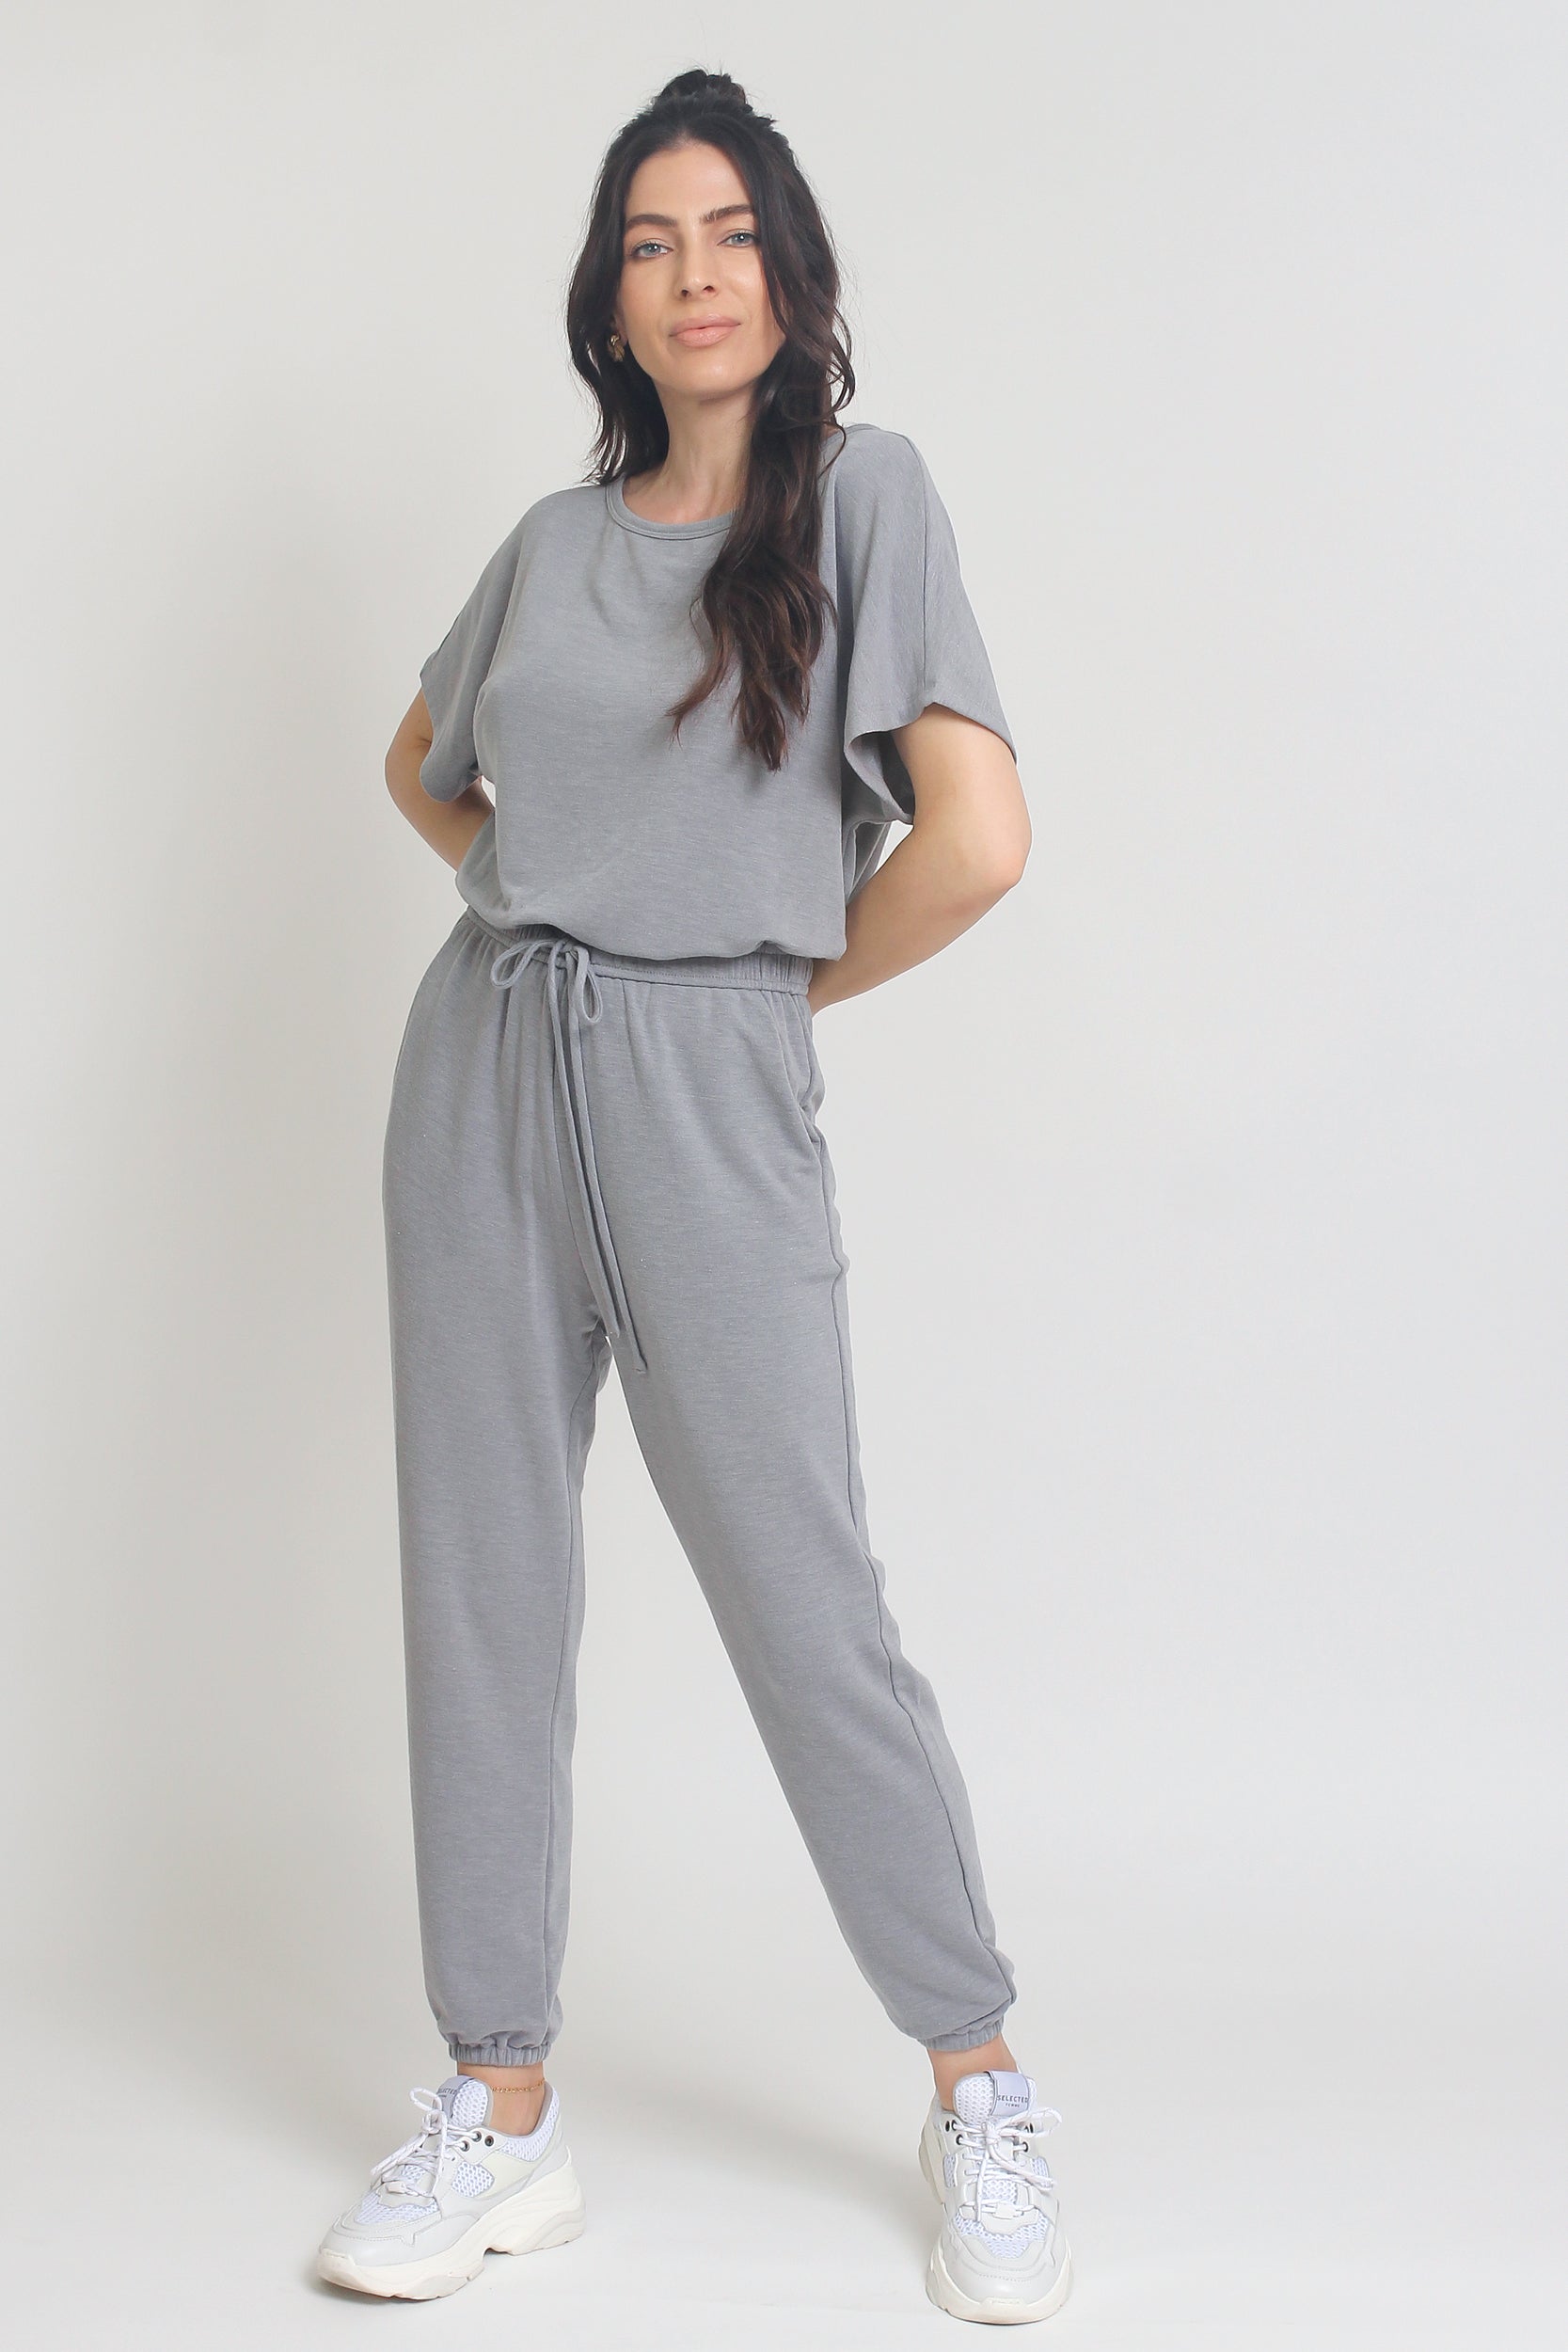 Terry cloth jogger jumpsuit, in Paloma.